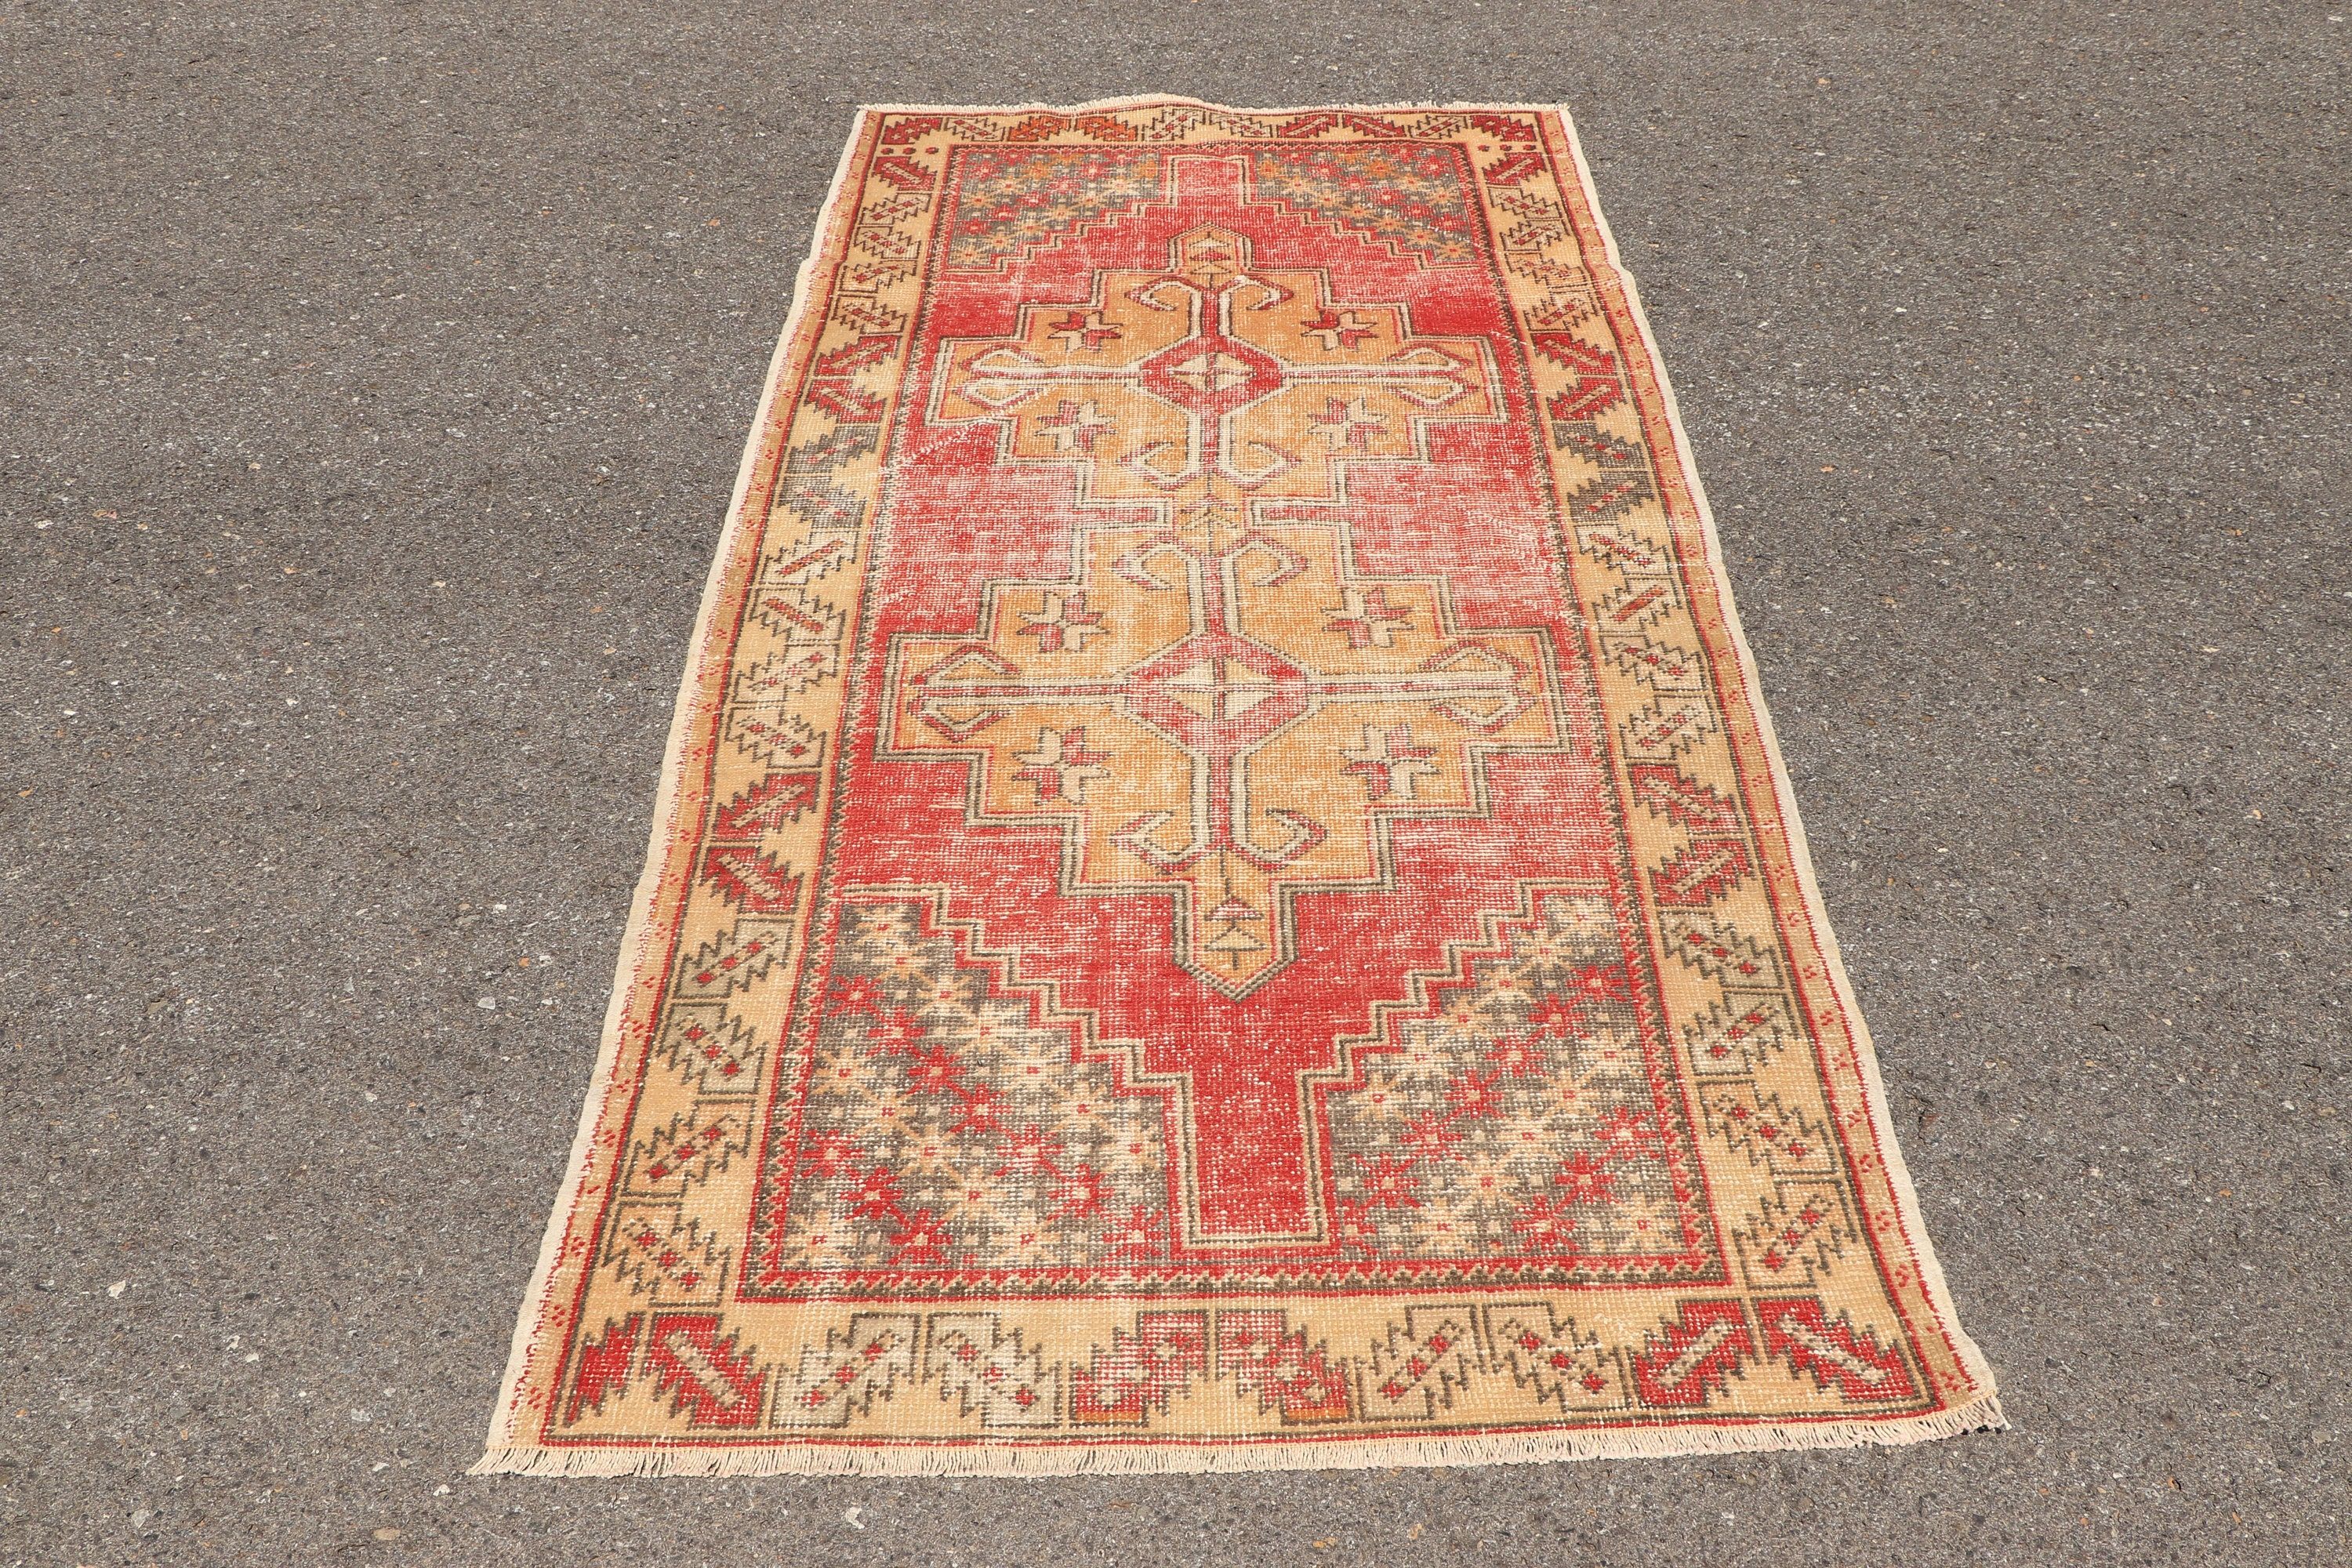 Antique Rug, Red Moroccan Rug, 3.6x7.5 ft Area Rug, Vintage Rugs, Floor Rug, Rugs for Kitchen, Muted Rugs, Turkish Rug, Living Room Rugs